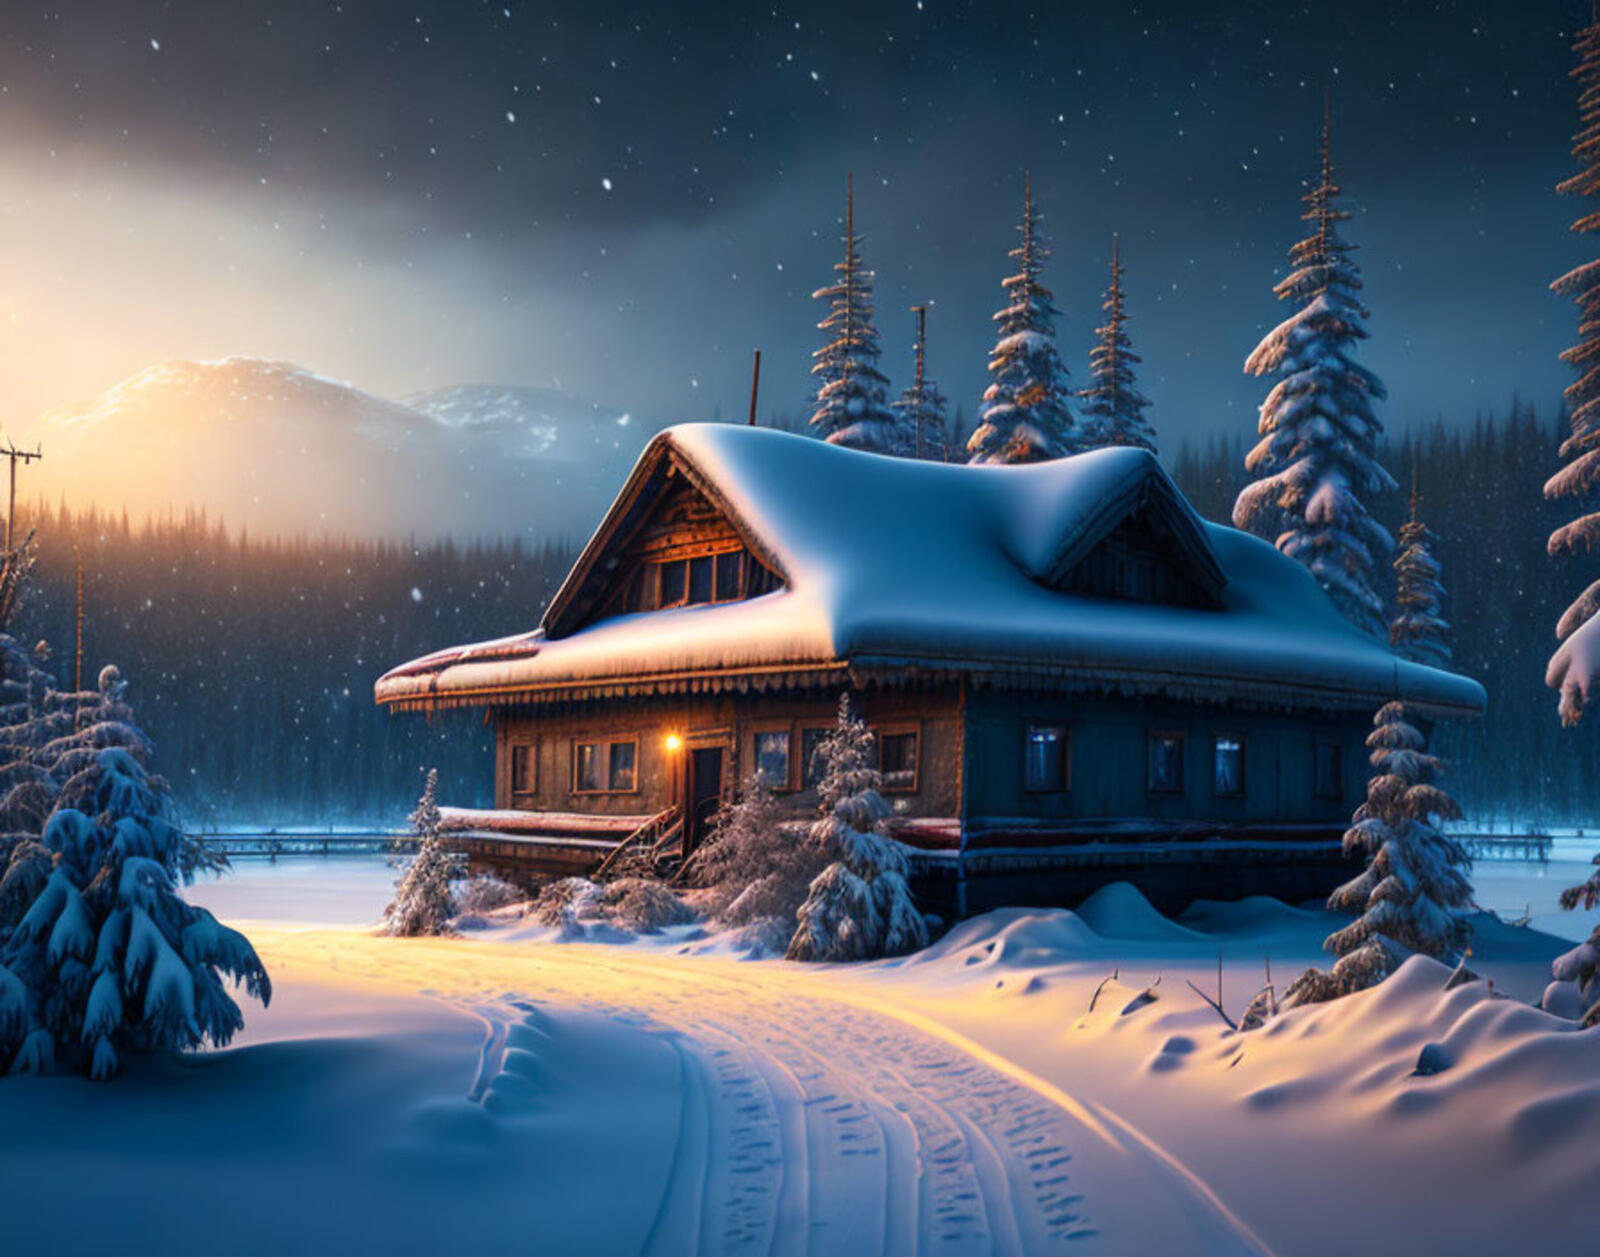 Free photo Cartoon picture of a winter house in the evening time